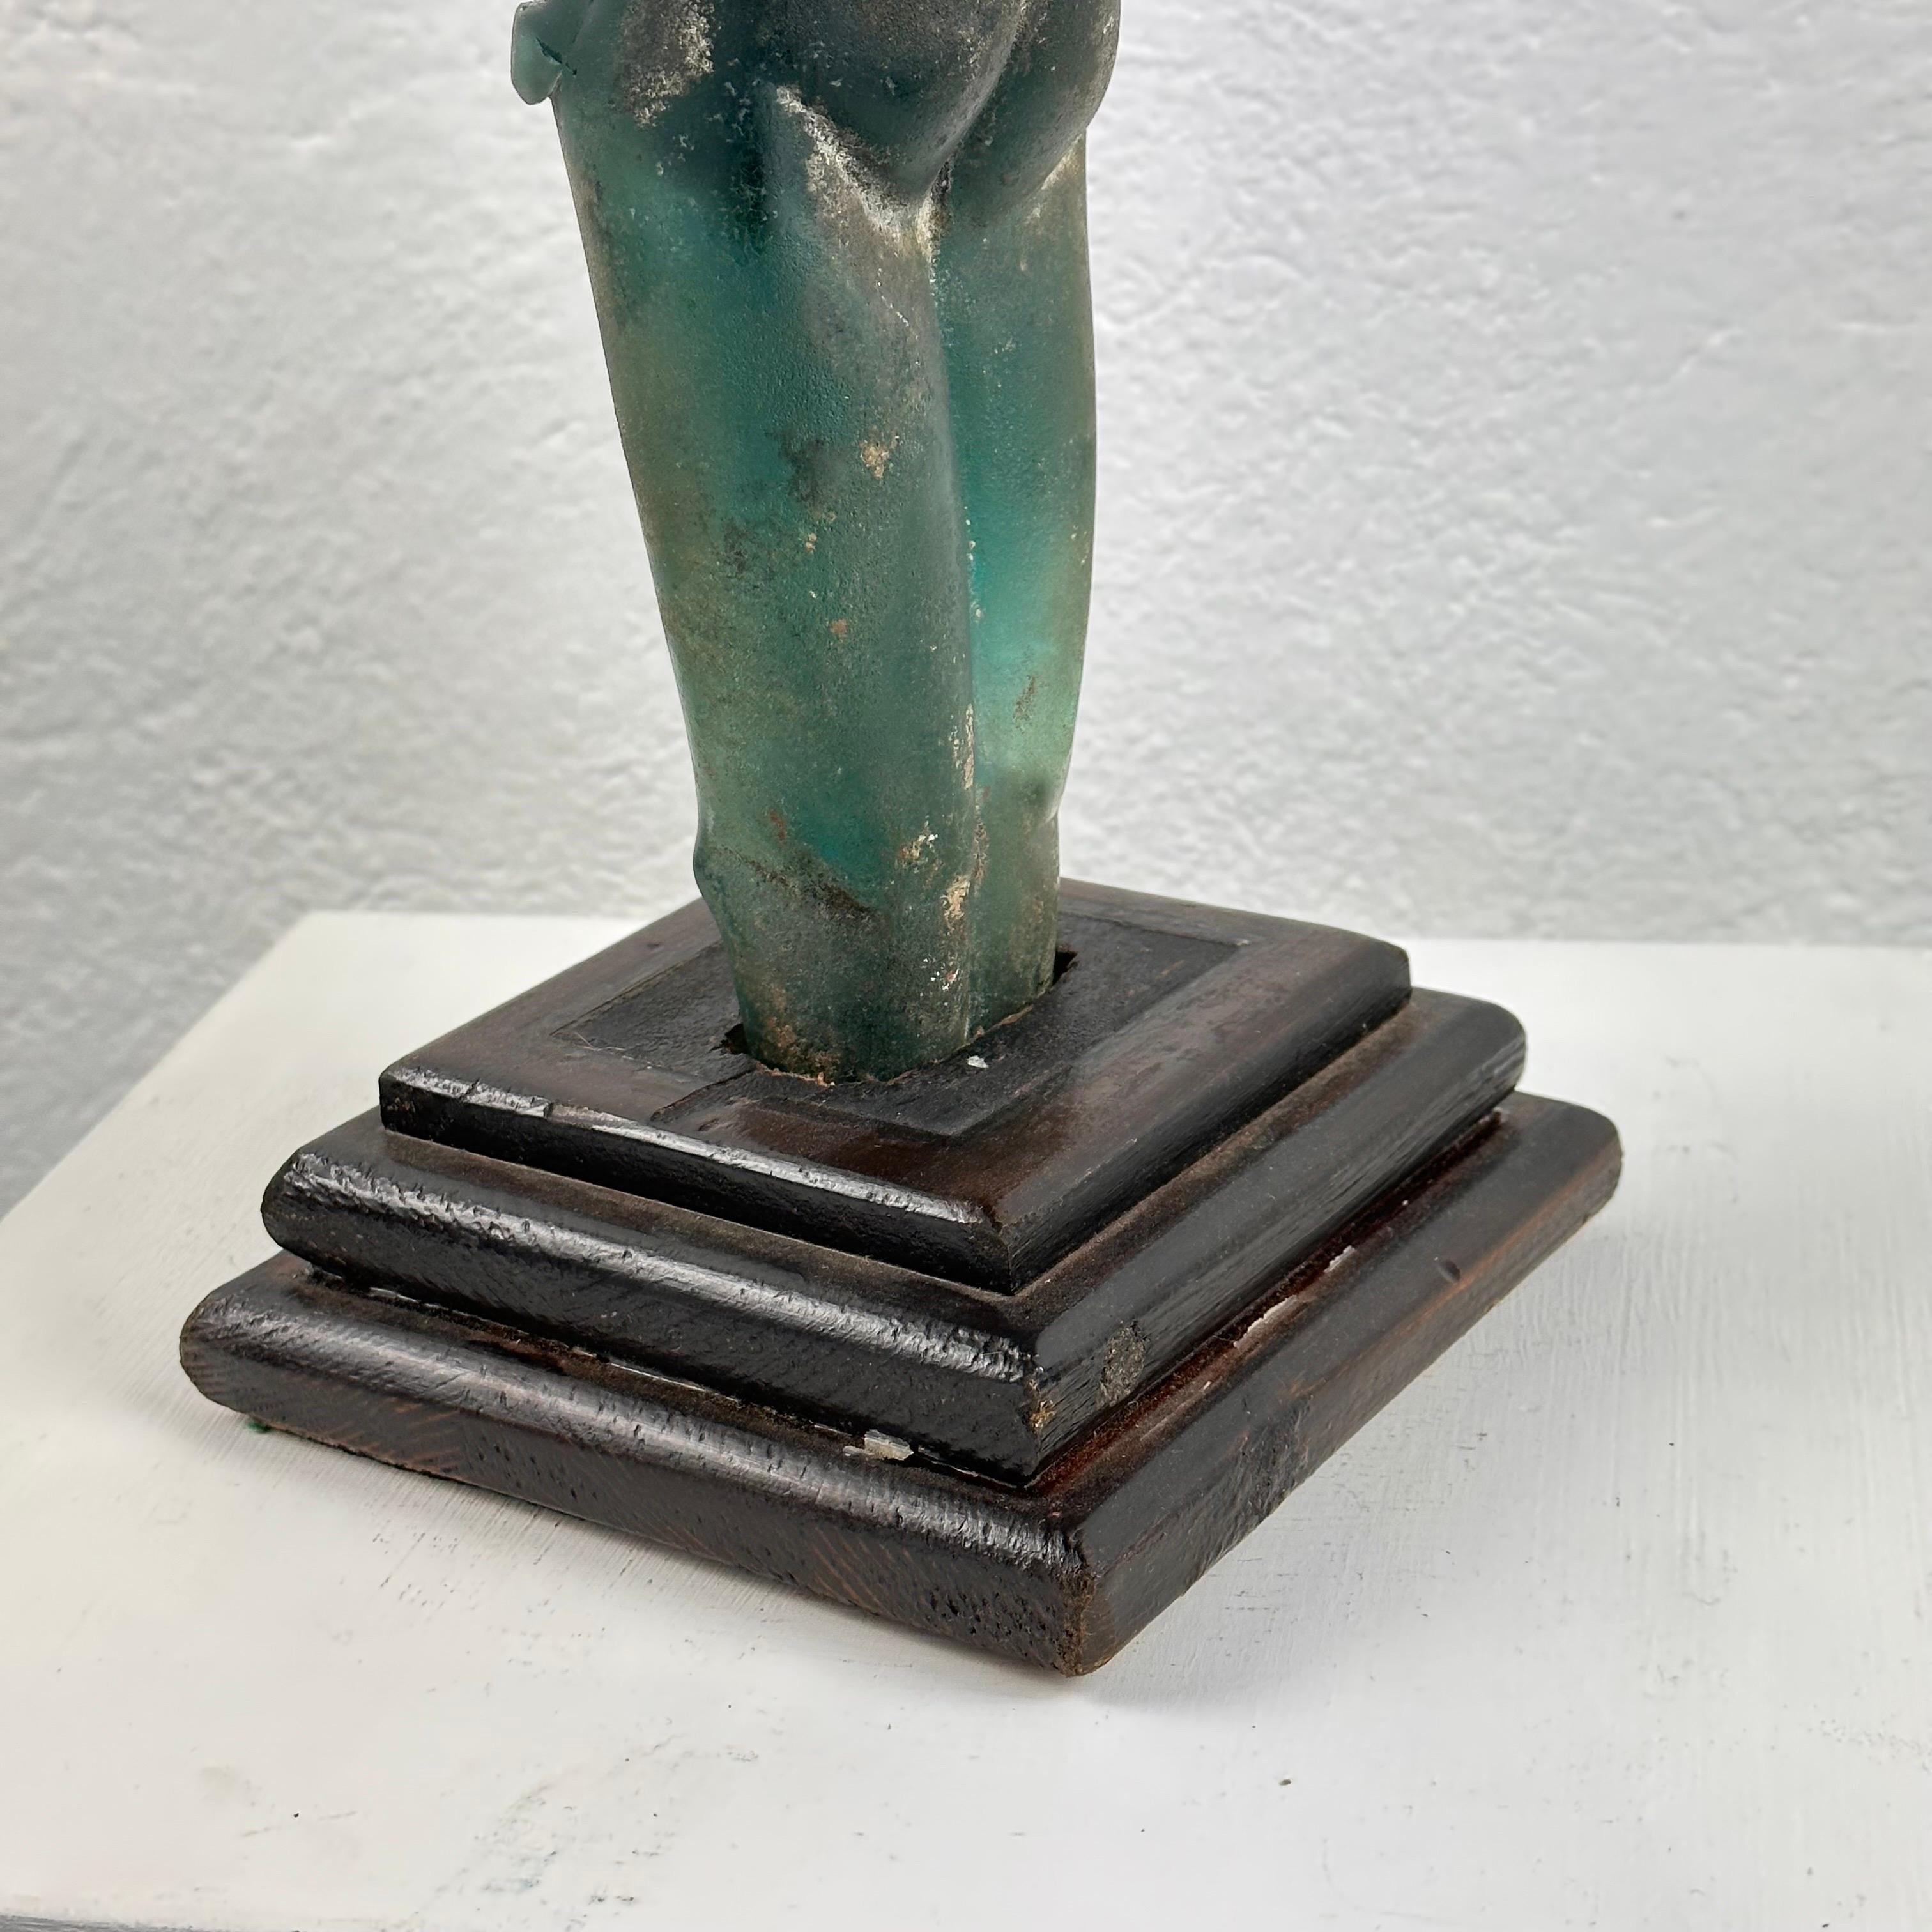 Very Rare Archimede Seguso Etched Murano Glass Woman's Sculpture, 1930s For Sale 9